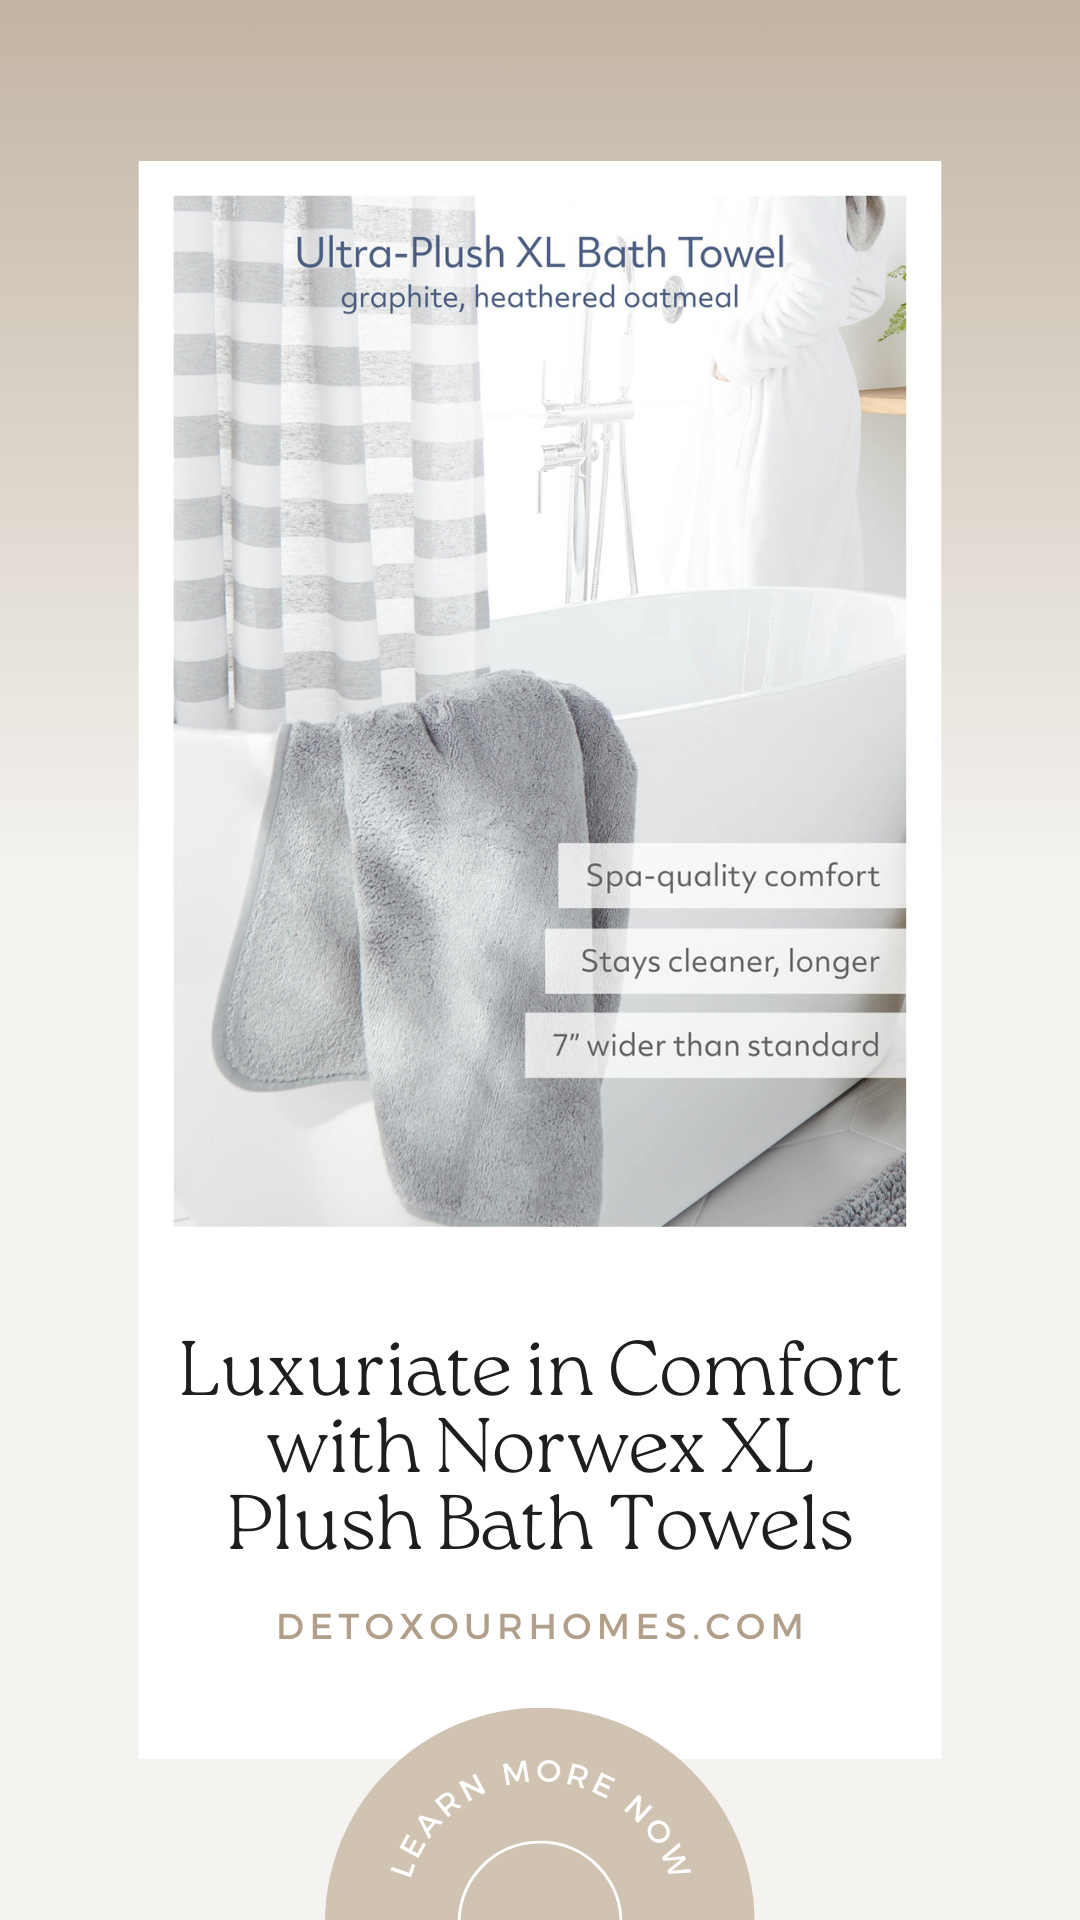 Luxuriate in Comfort with Norwex XL Plush Bath Towels